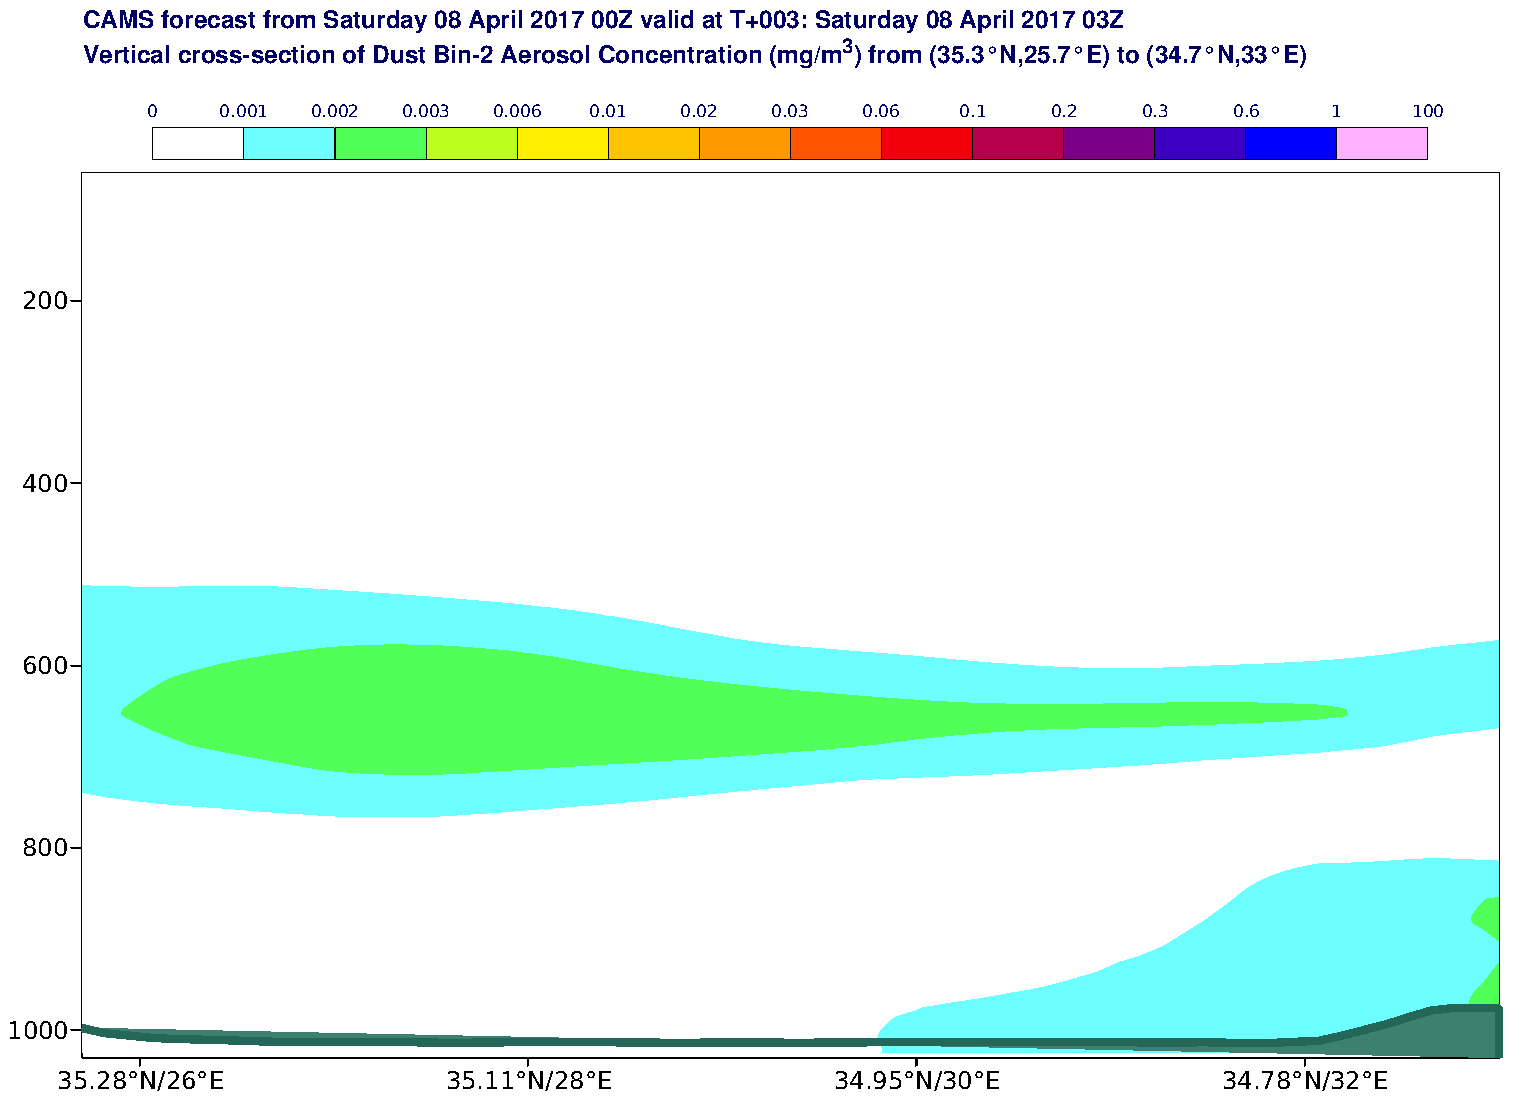 Vertical cross-section of Dust Bin-2 Aerosol Concentration (mg/m3) valid at T3 - 2017-04-08 03:00